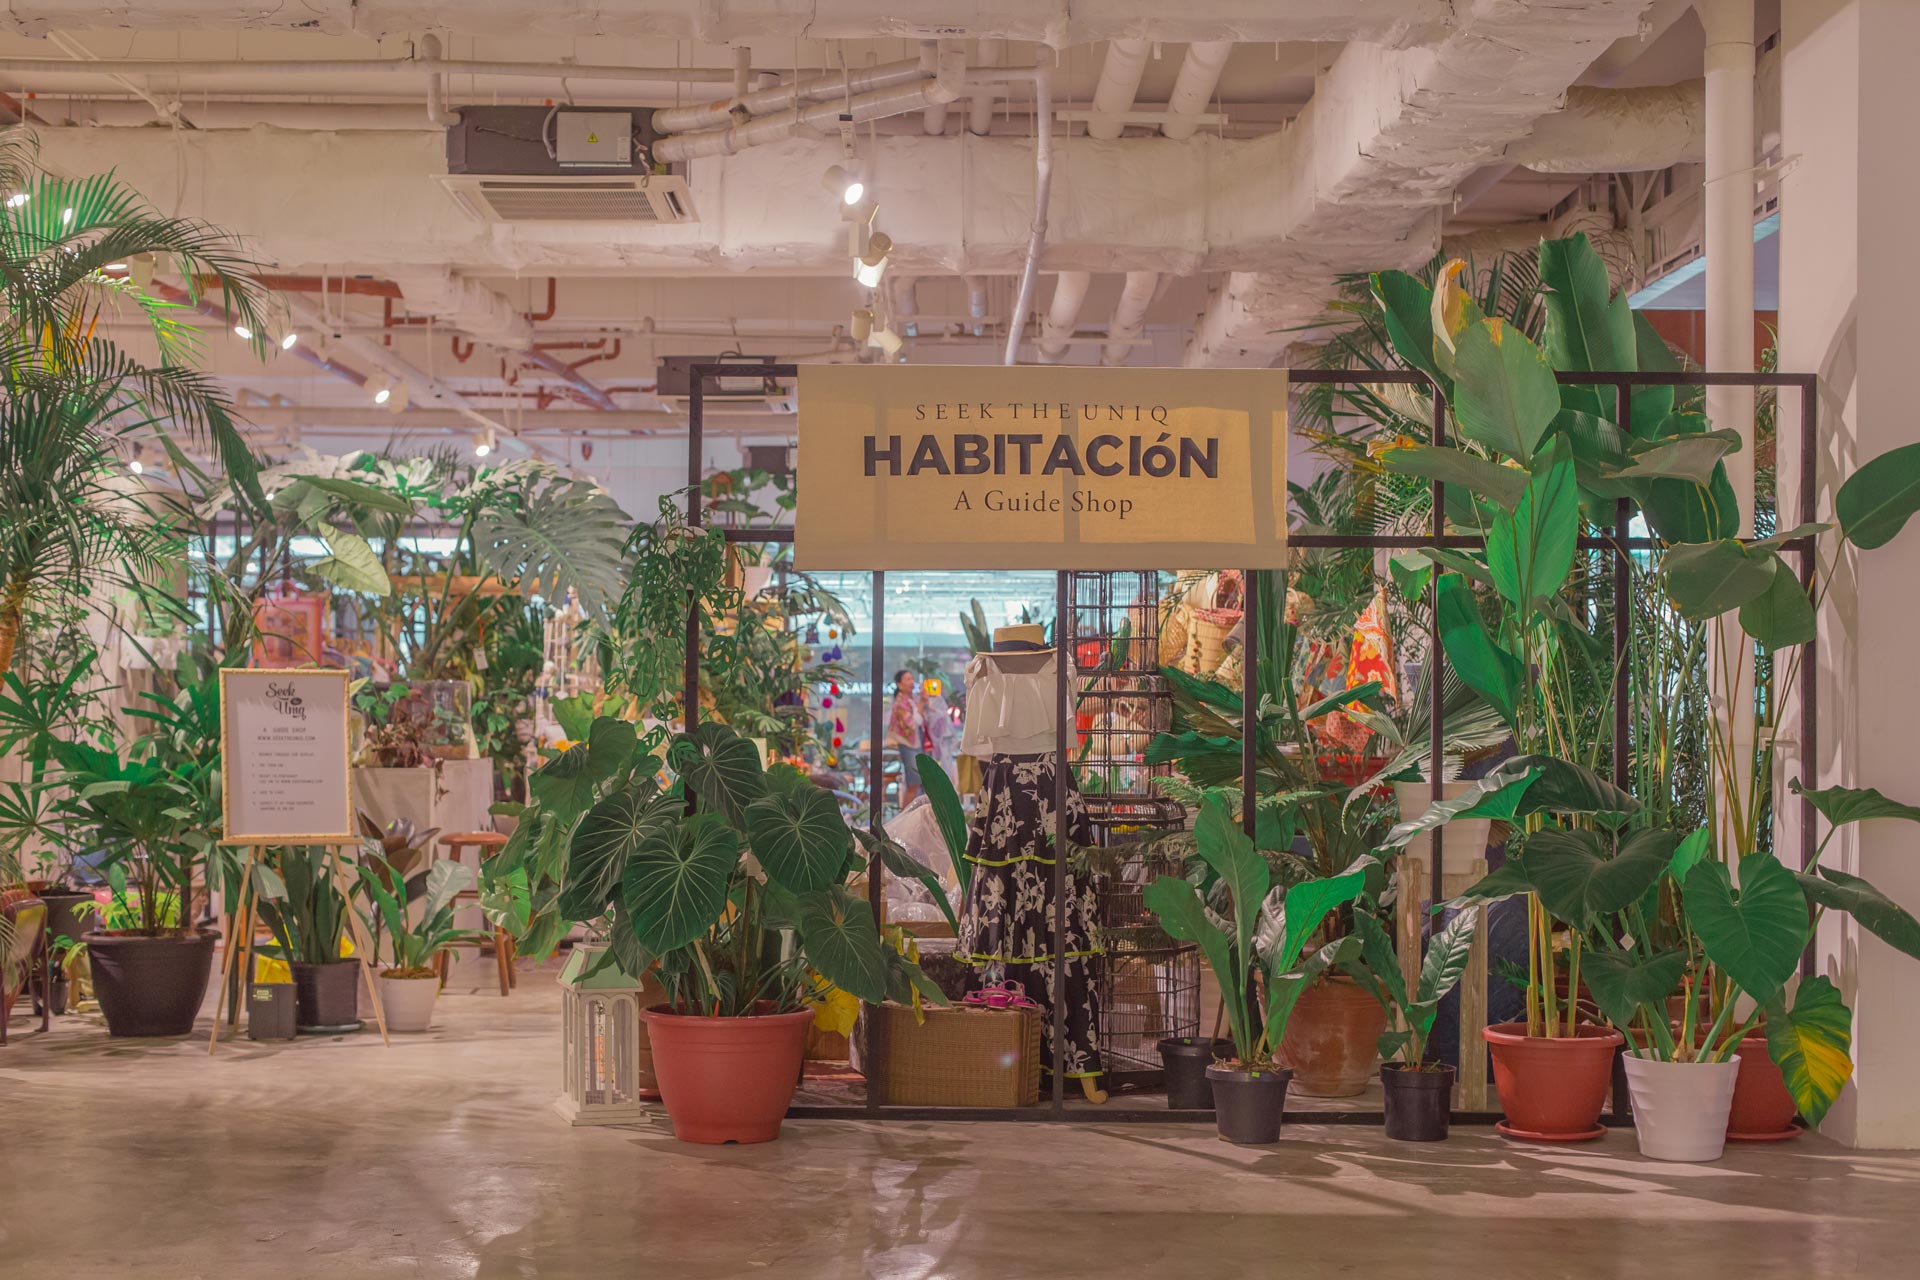 Habitación, A Guide Shop by Seek the Uniq, Powerplant Mall (Space design by Kitty Bunag of CRAFTSMITH GUILD Team)